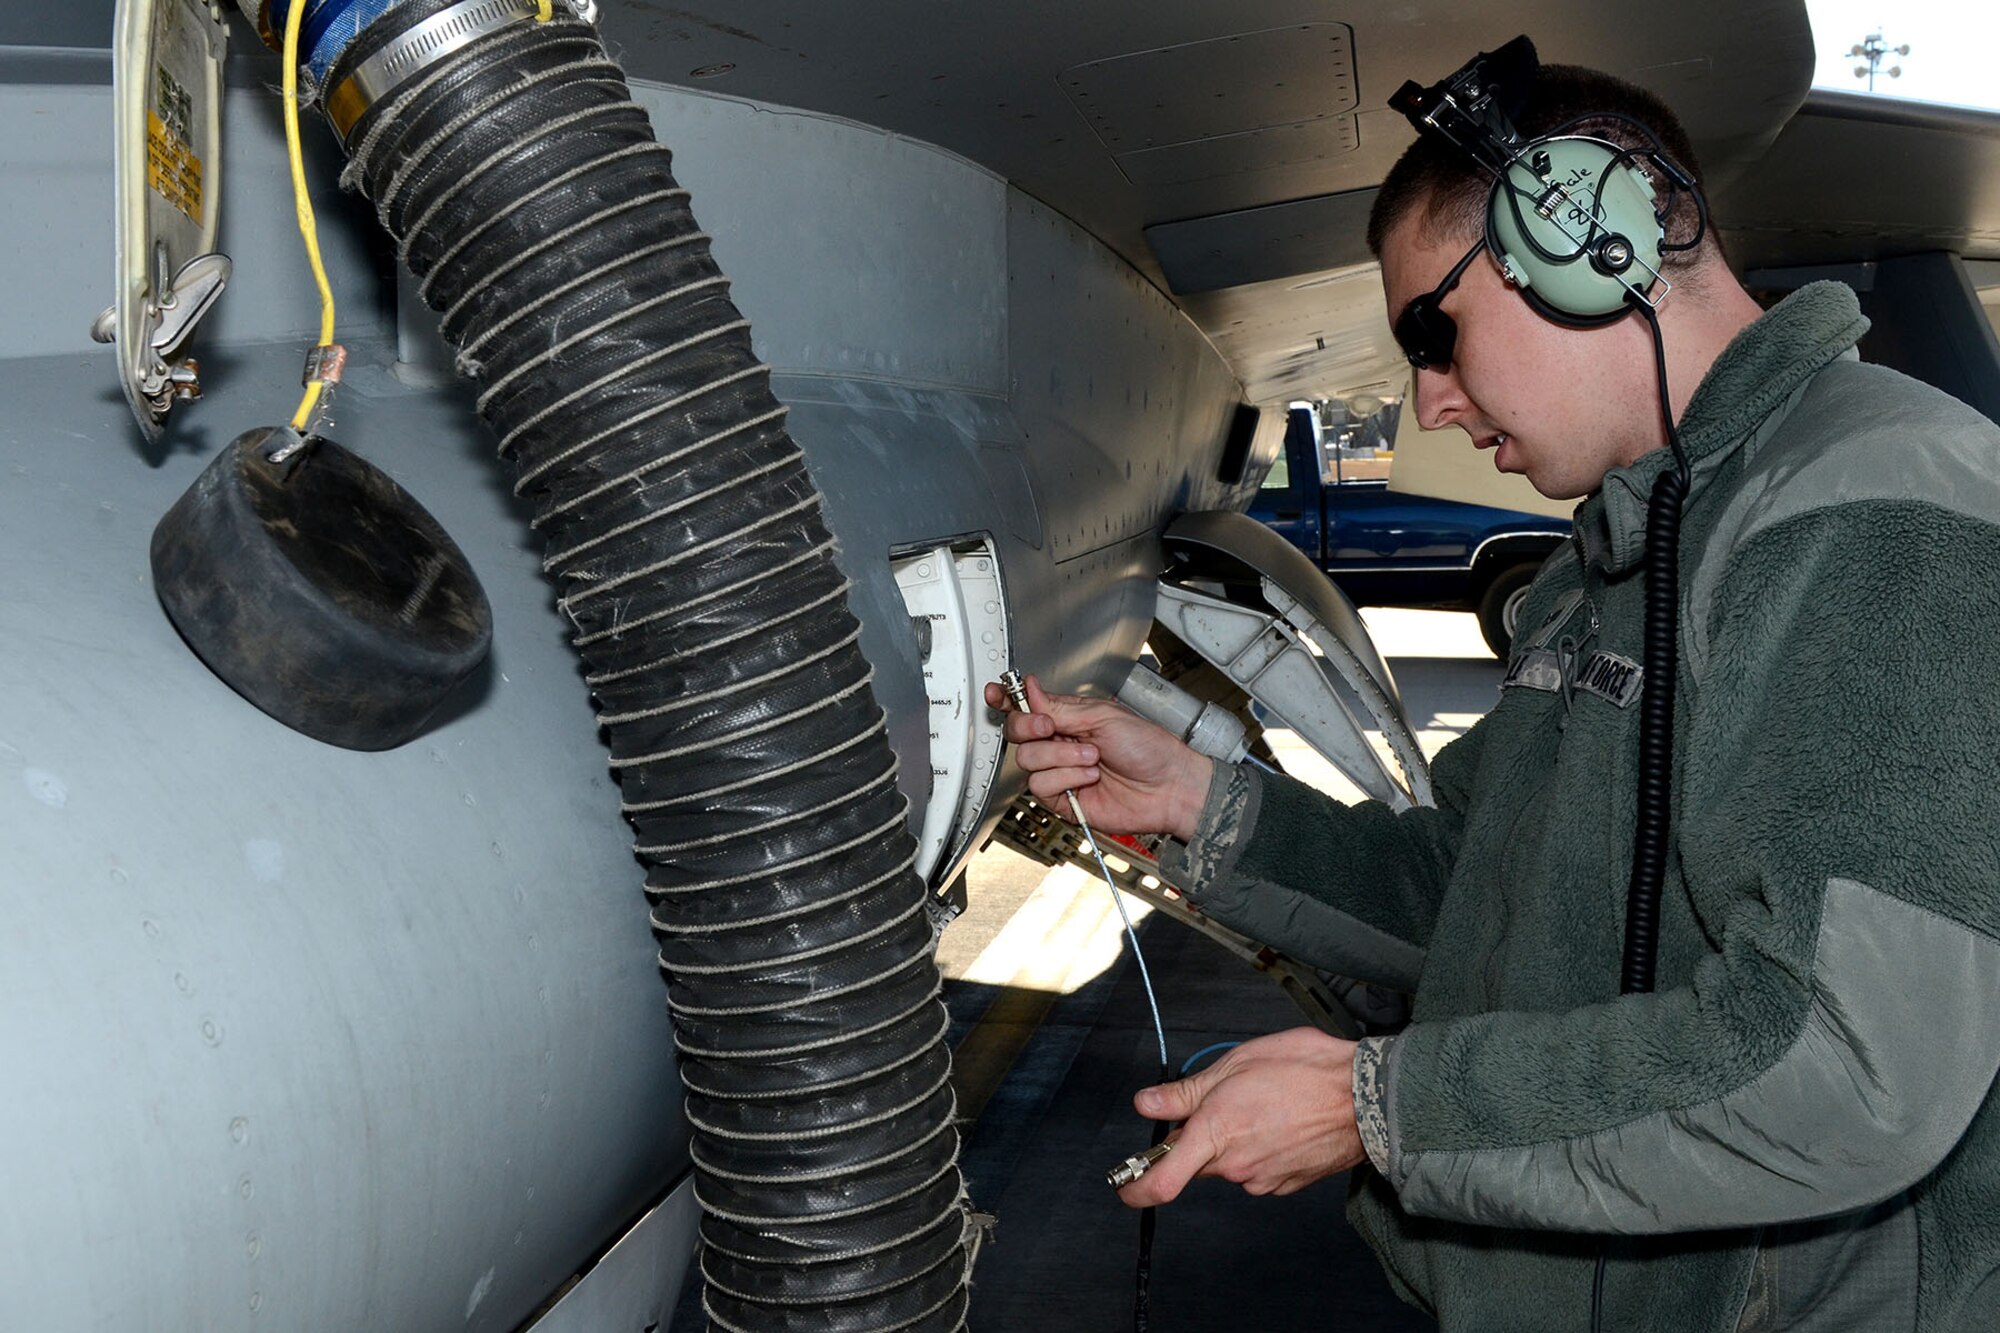 U.S. Air Force Senior Airman Earl Sale, with the 495th Fighter Group, Det. 157, 169th Aircraft Maintenance Squadron avionics shop at McEntire Joint National Guard Base, South Carolina Air National Guard, sets up the Joint Service Electronic Combat Systems Tester to an F-16 Fighting Falcon, Dec. 11, 2013. The JSECST is a 180-day preventative maintenance practice that performs a confidence test of the radar threat warning system in the jet.  (U.S. Air National Guard photo by Tech. Sgt. Caycee Watson/Released)